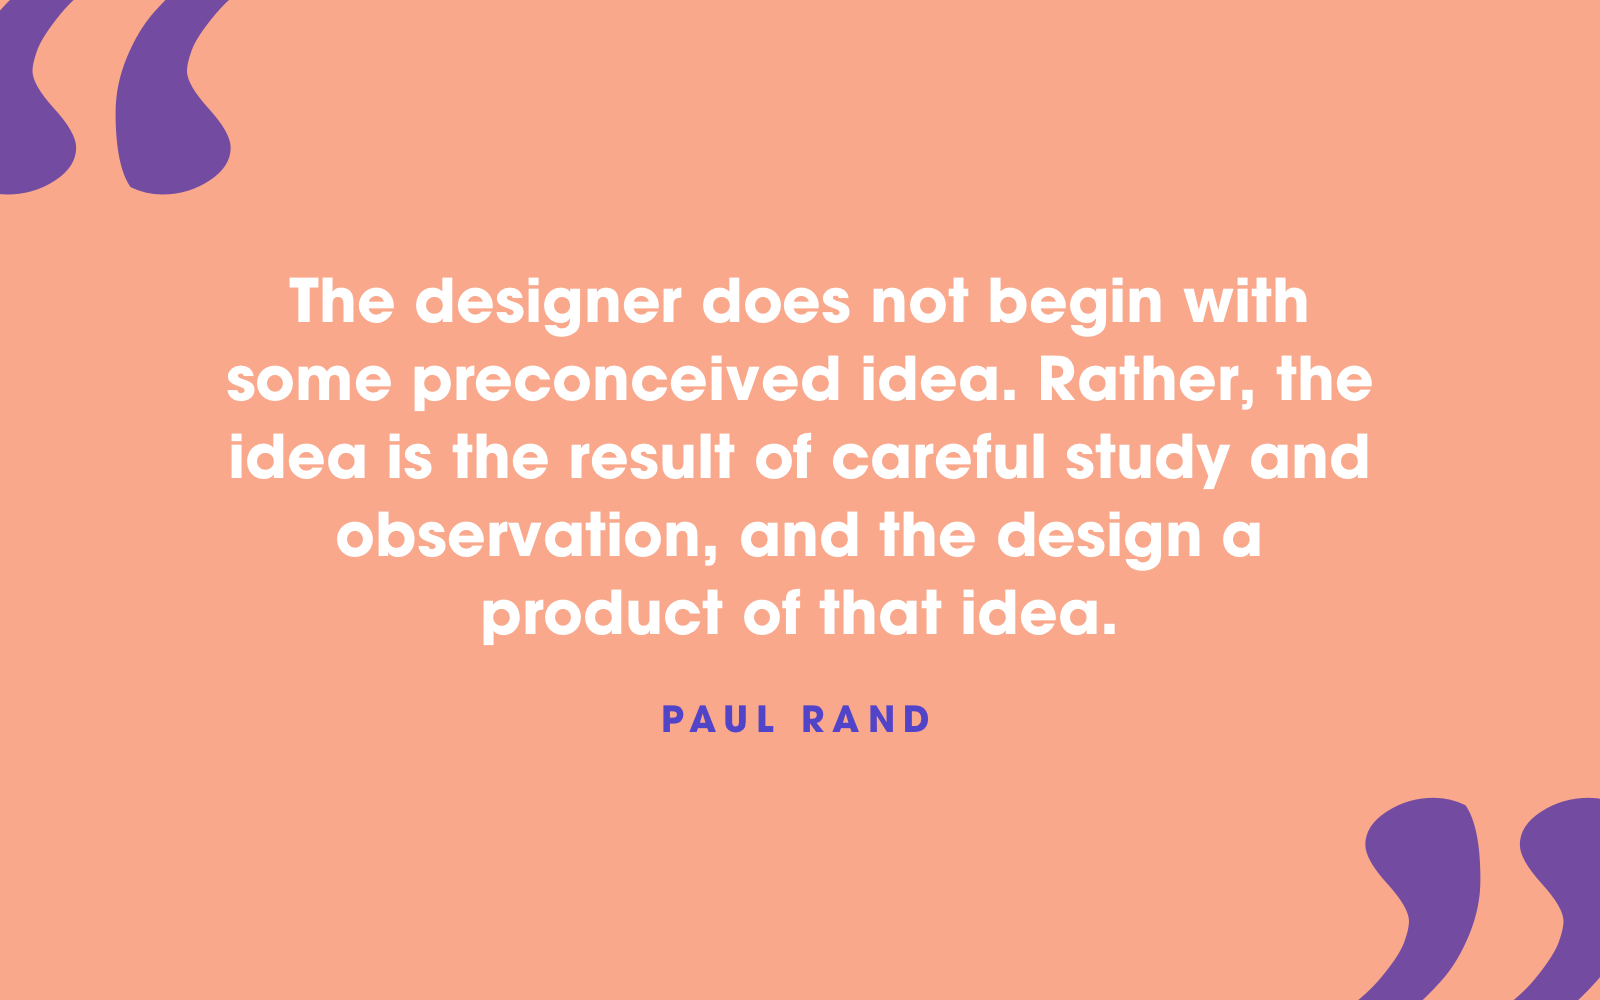 35 Quotes on Design That Will Fuel Up Your Creativity